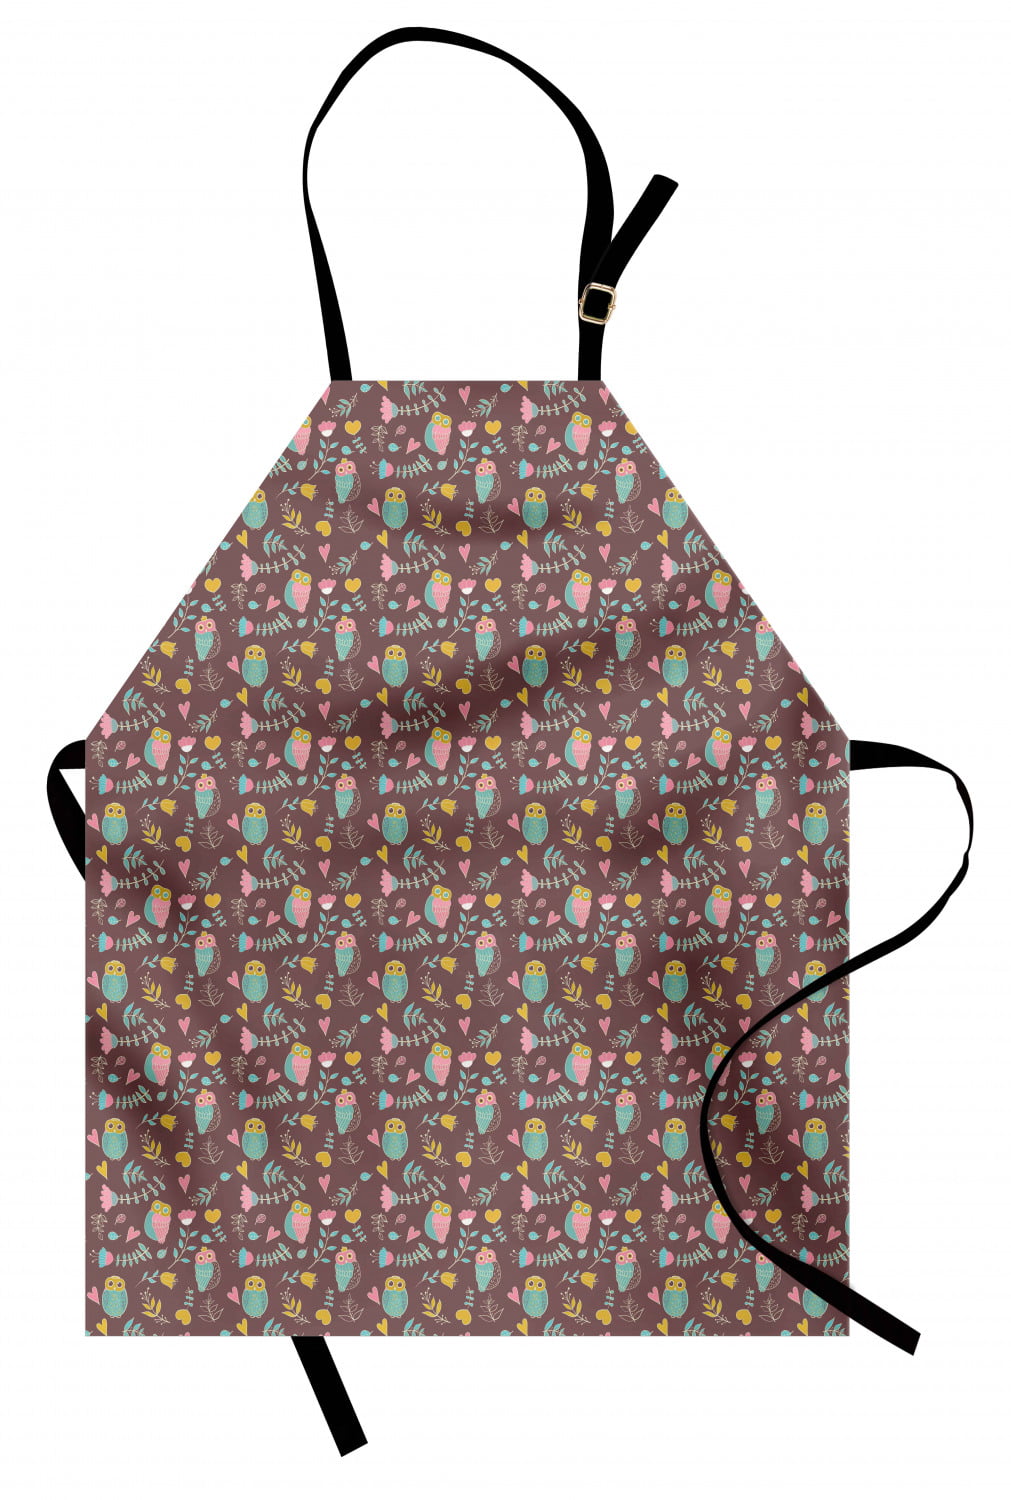 Details about   Ambesonne Apron Bib Adjustable Neck Strap for Gardening Cooking Outdoor Use 